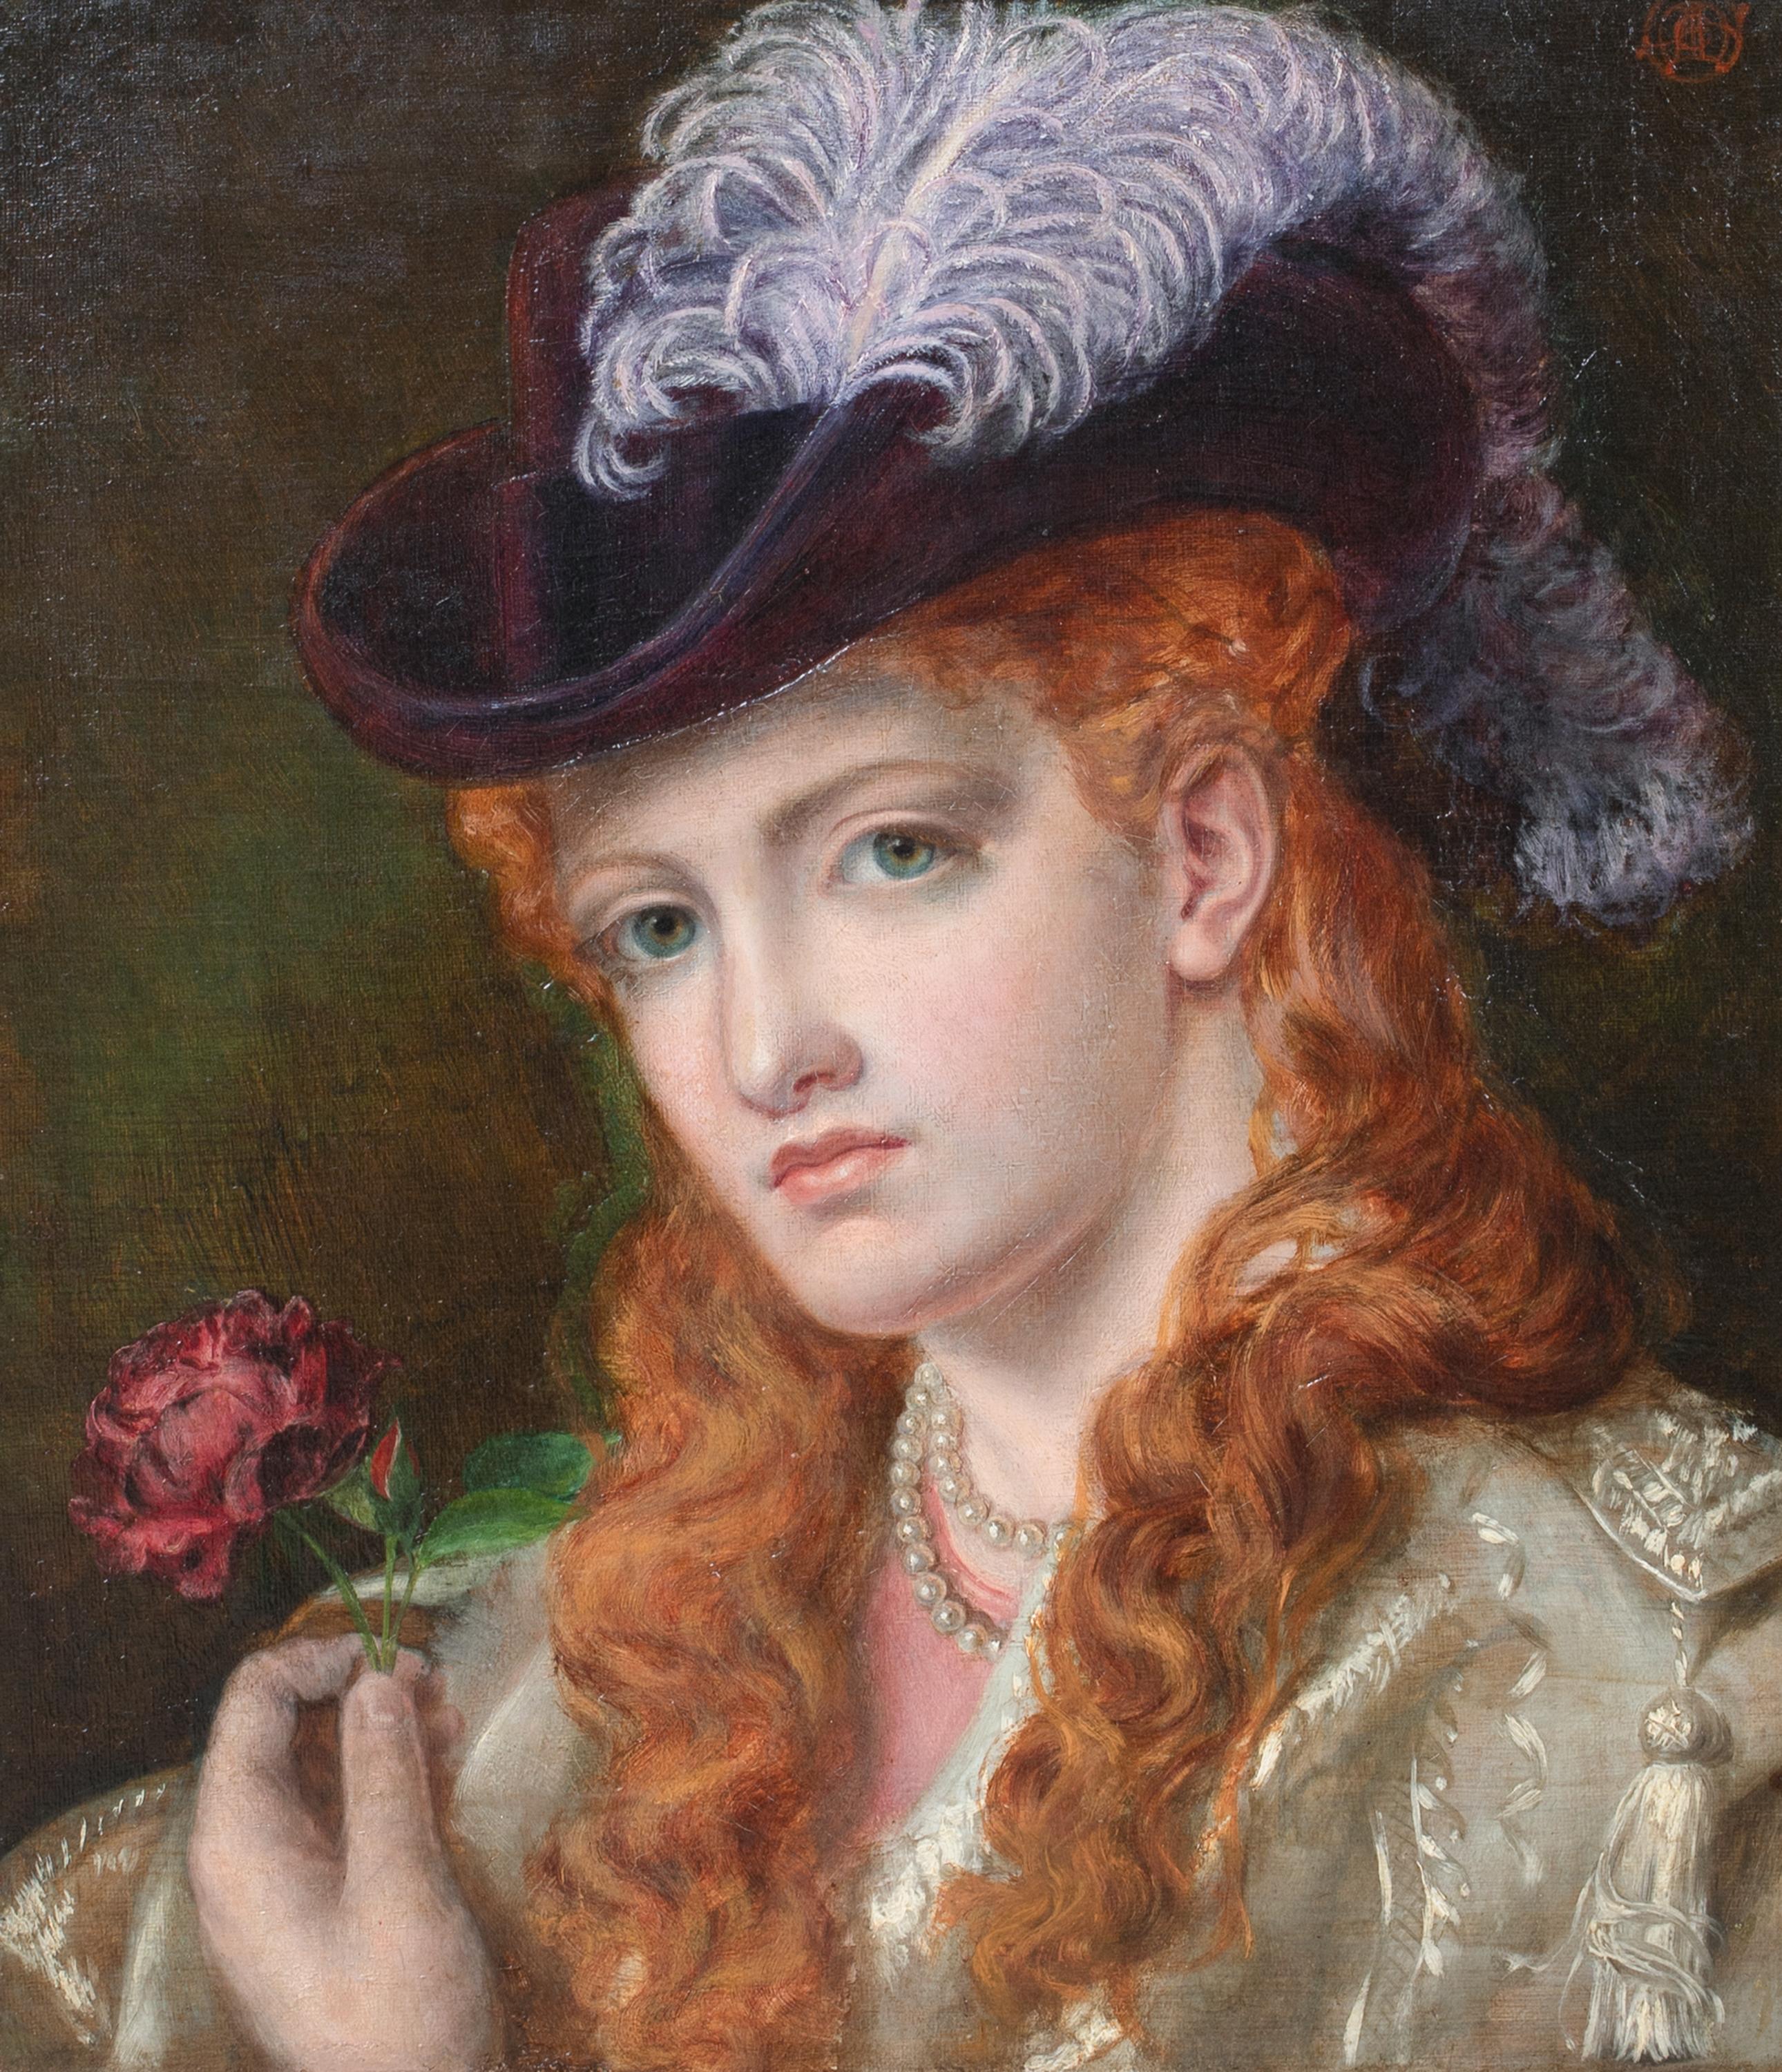 The Rose, 19th Century

by Emma SANDYS (1834-1877) similar to $70,000

Large 19th Century Pre-Raphaelite portrait of a young red haired girl holding a rose, oil on canvas by Emma Sandys. Excellent quality and condition portrait of the girl holding a